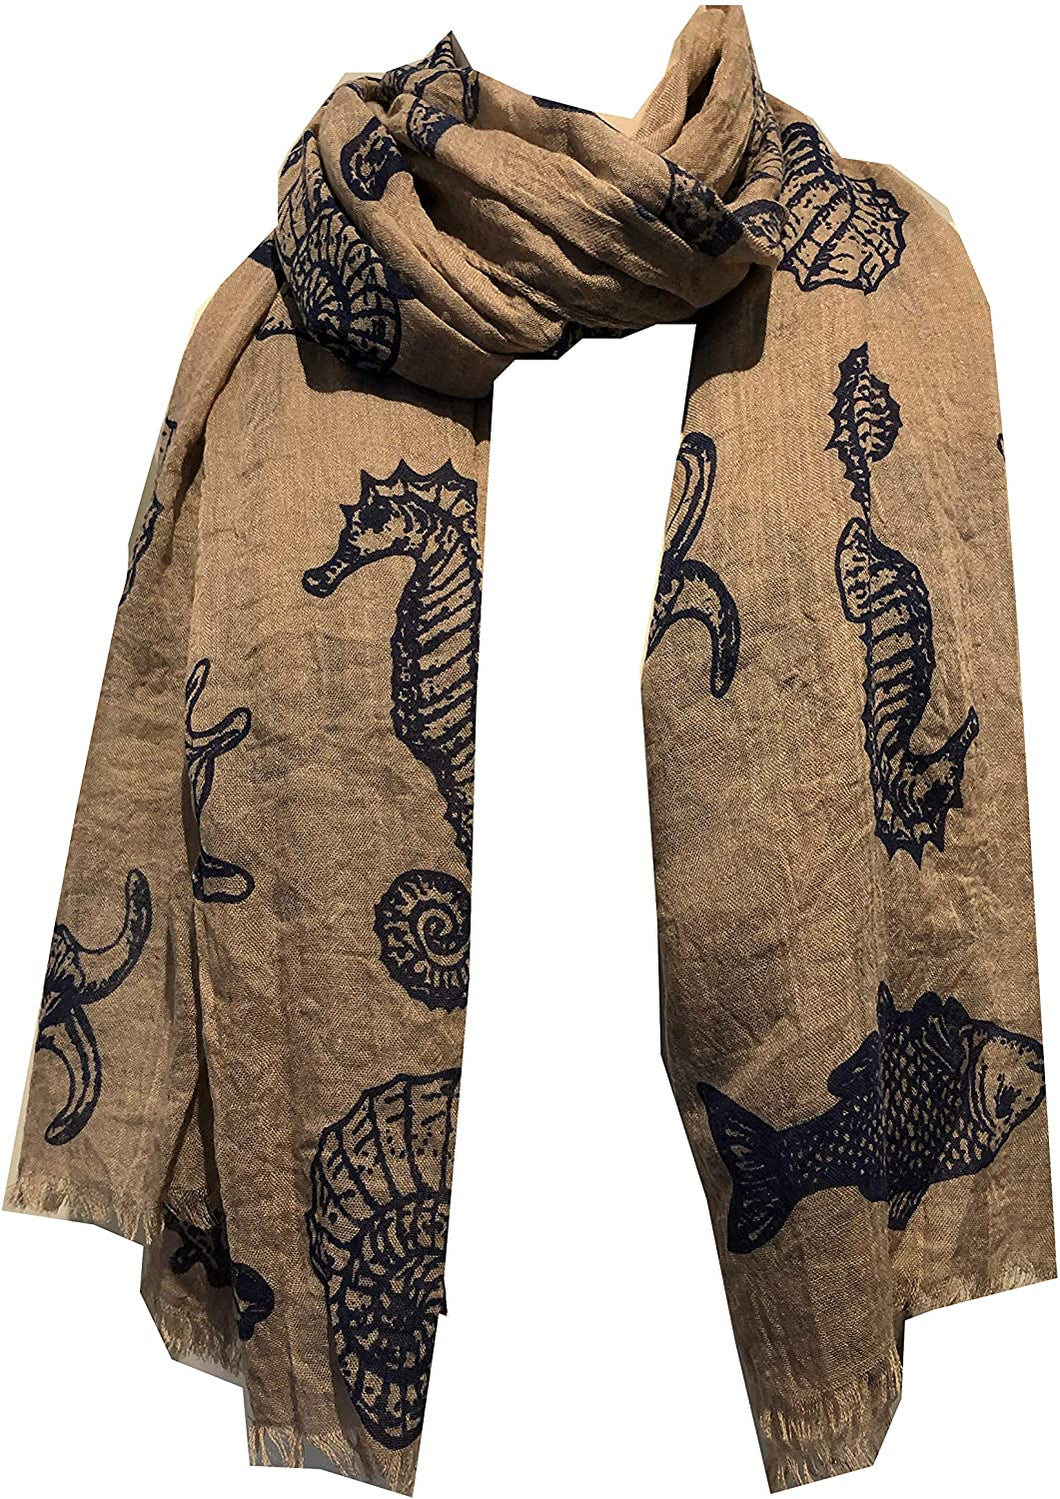 Pamper Yourself Now Beige/Brown with Blue Shells, Star Fish, sea Horse and Fish Under The sea Long Scarf with Frayed Edge.